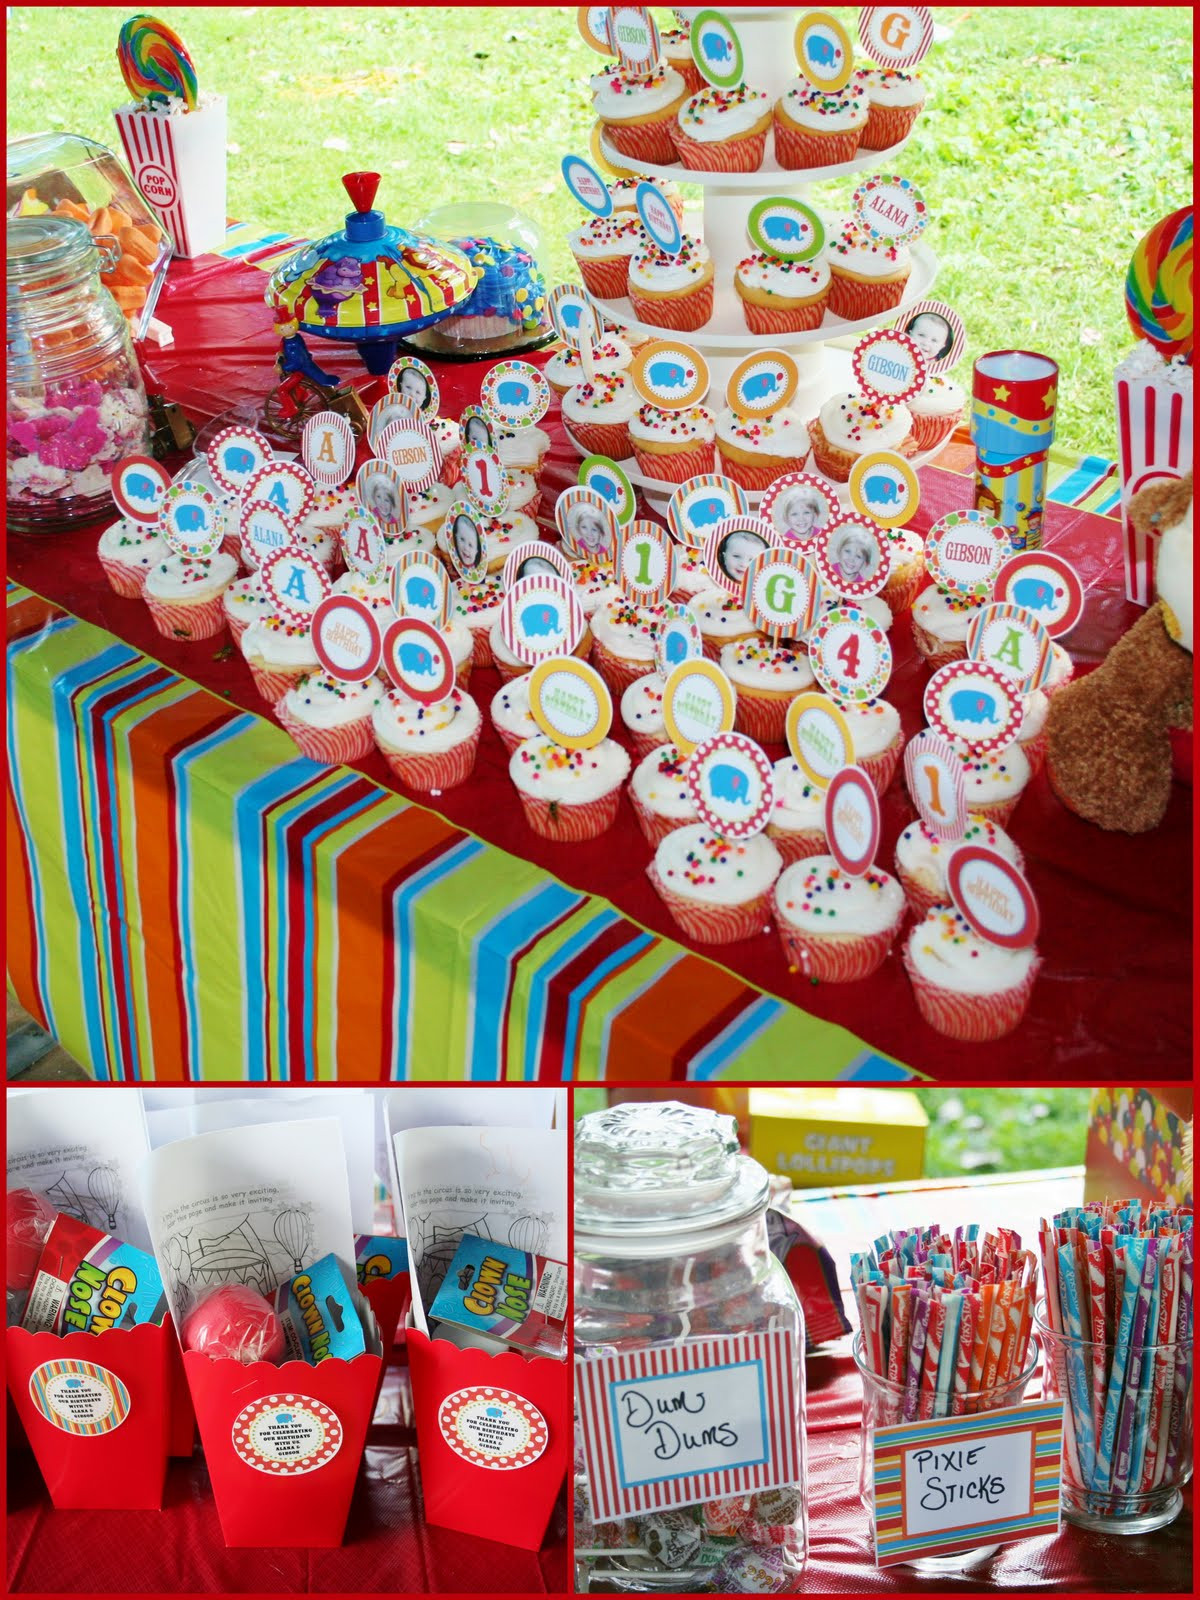 Circus Birthday Party Decorations
 Oikology 101 Circus Birthday Party Overview